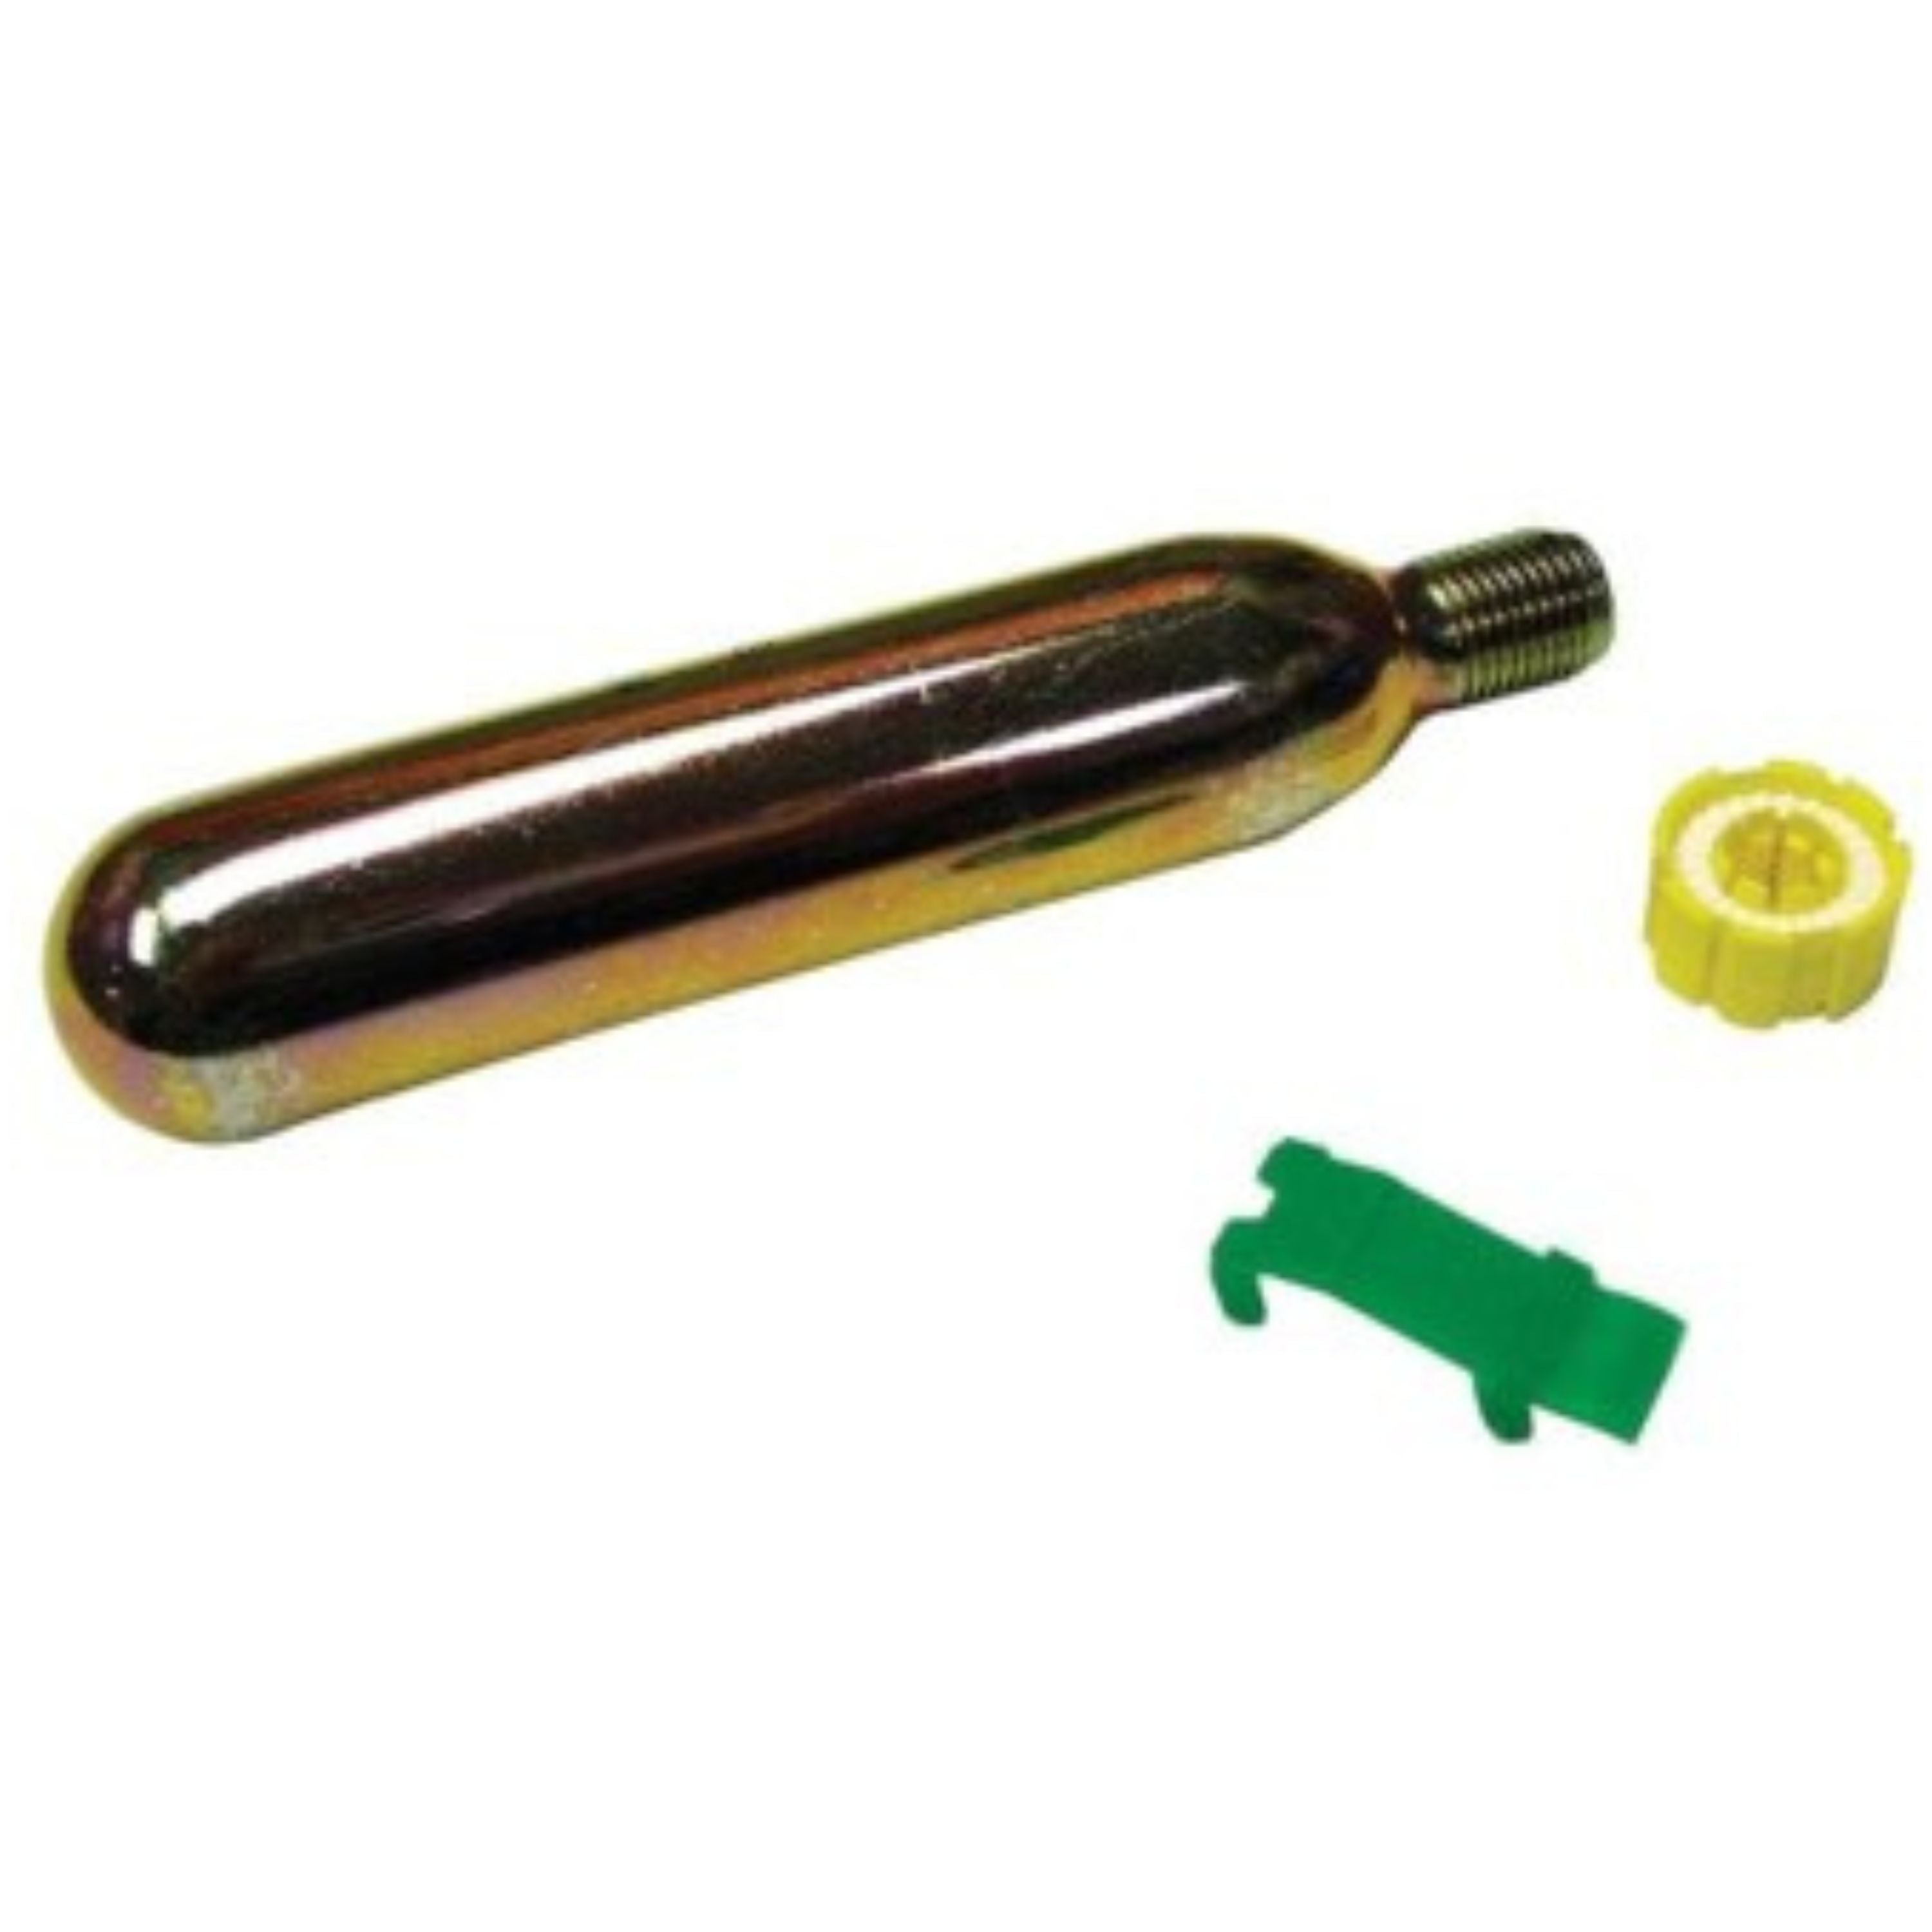 Automatic and manual rearming kit